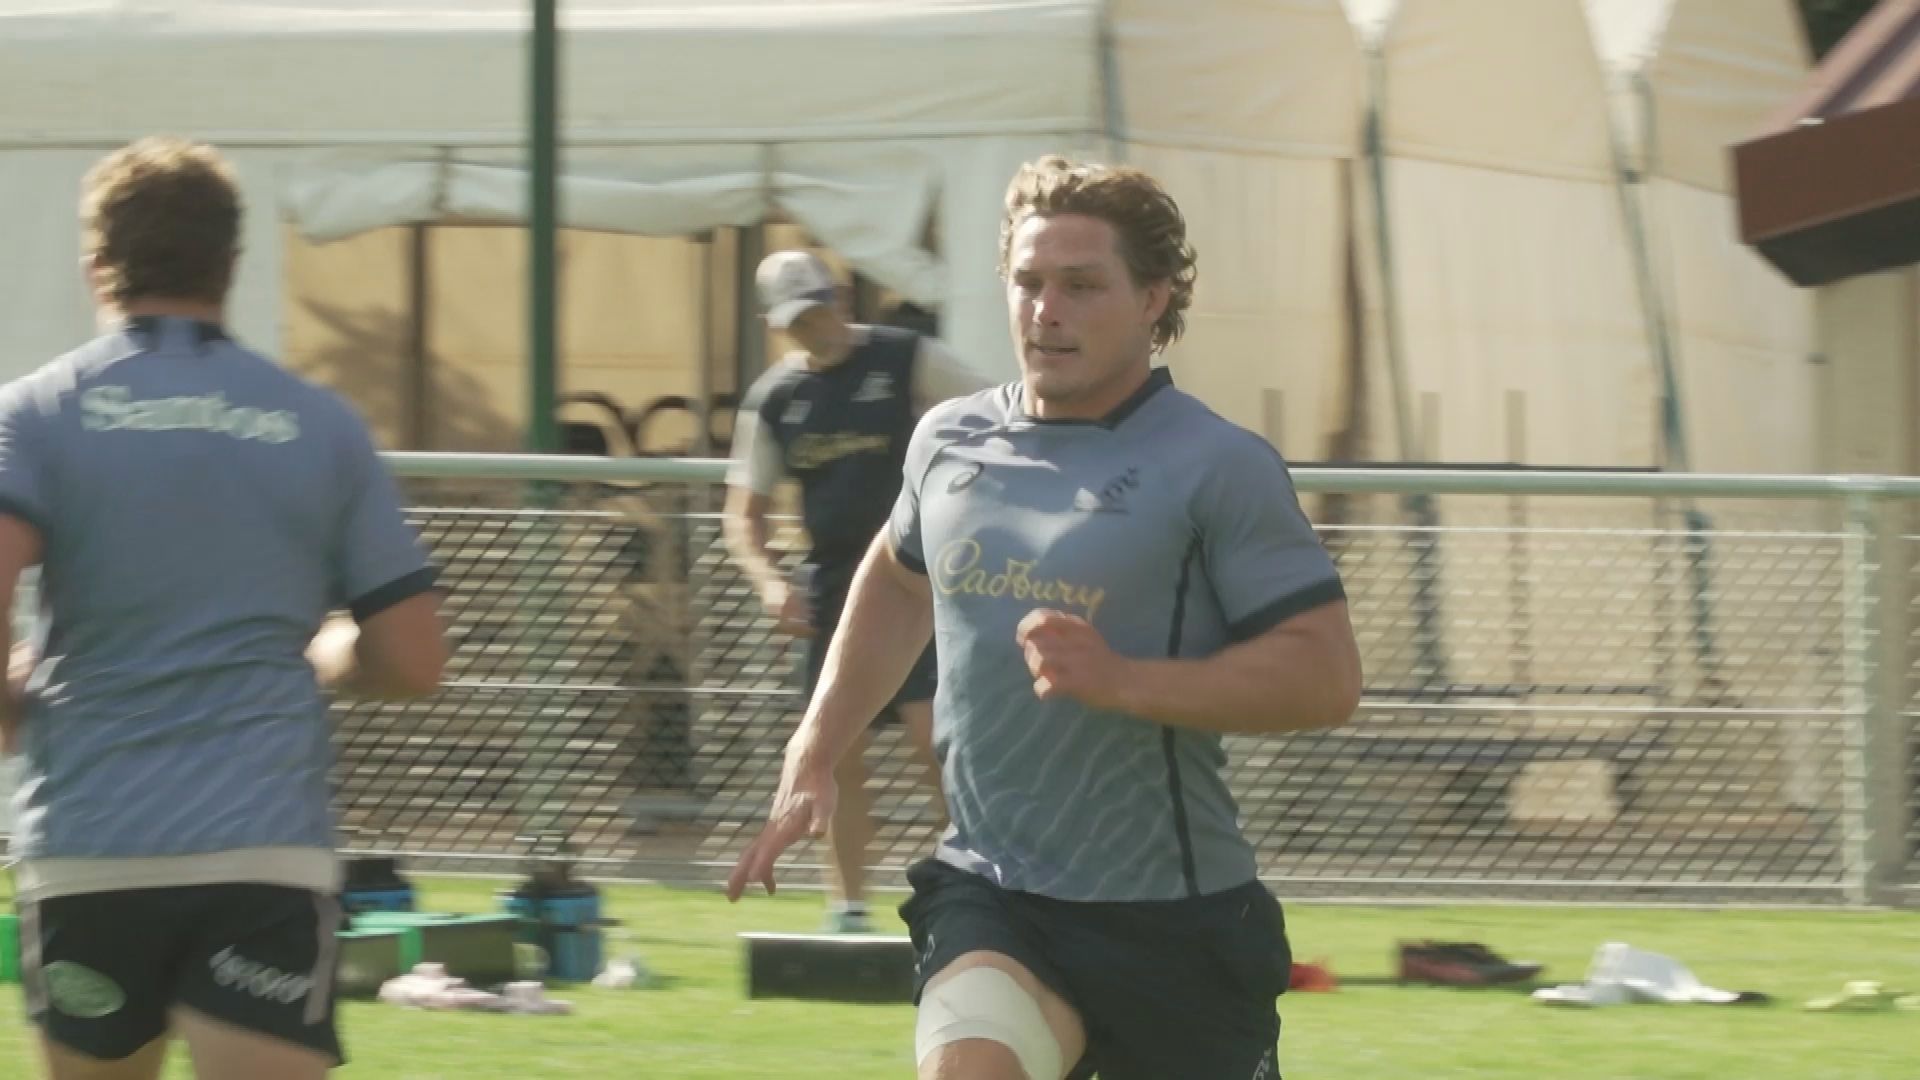 EXCLUSIVE: Michael Hooper eyes Paris Olympics but not giving up on Rugby World Cup dream